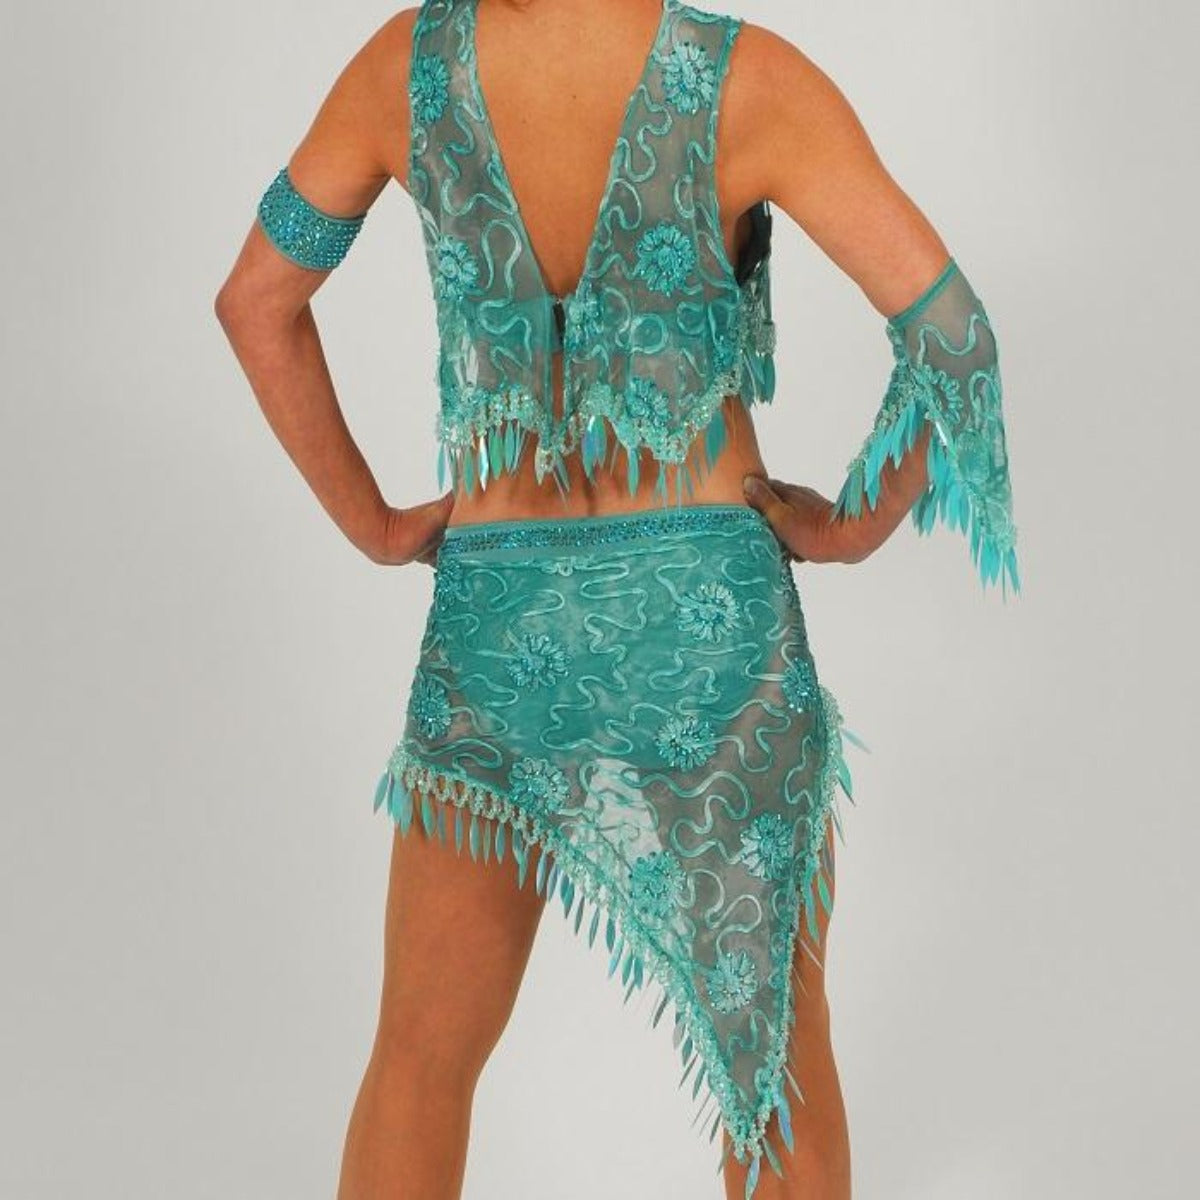 Crystal's Creations close back view of Gorgeous aqua Latin/rhythm two piece dance dress created of gorgeous aqua soutache lace fabric, embellished with about 10 gross of Aqua AB Swarovski stones with lots of hand beading & paillettes.